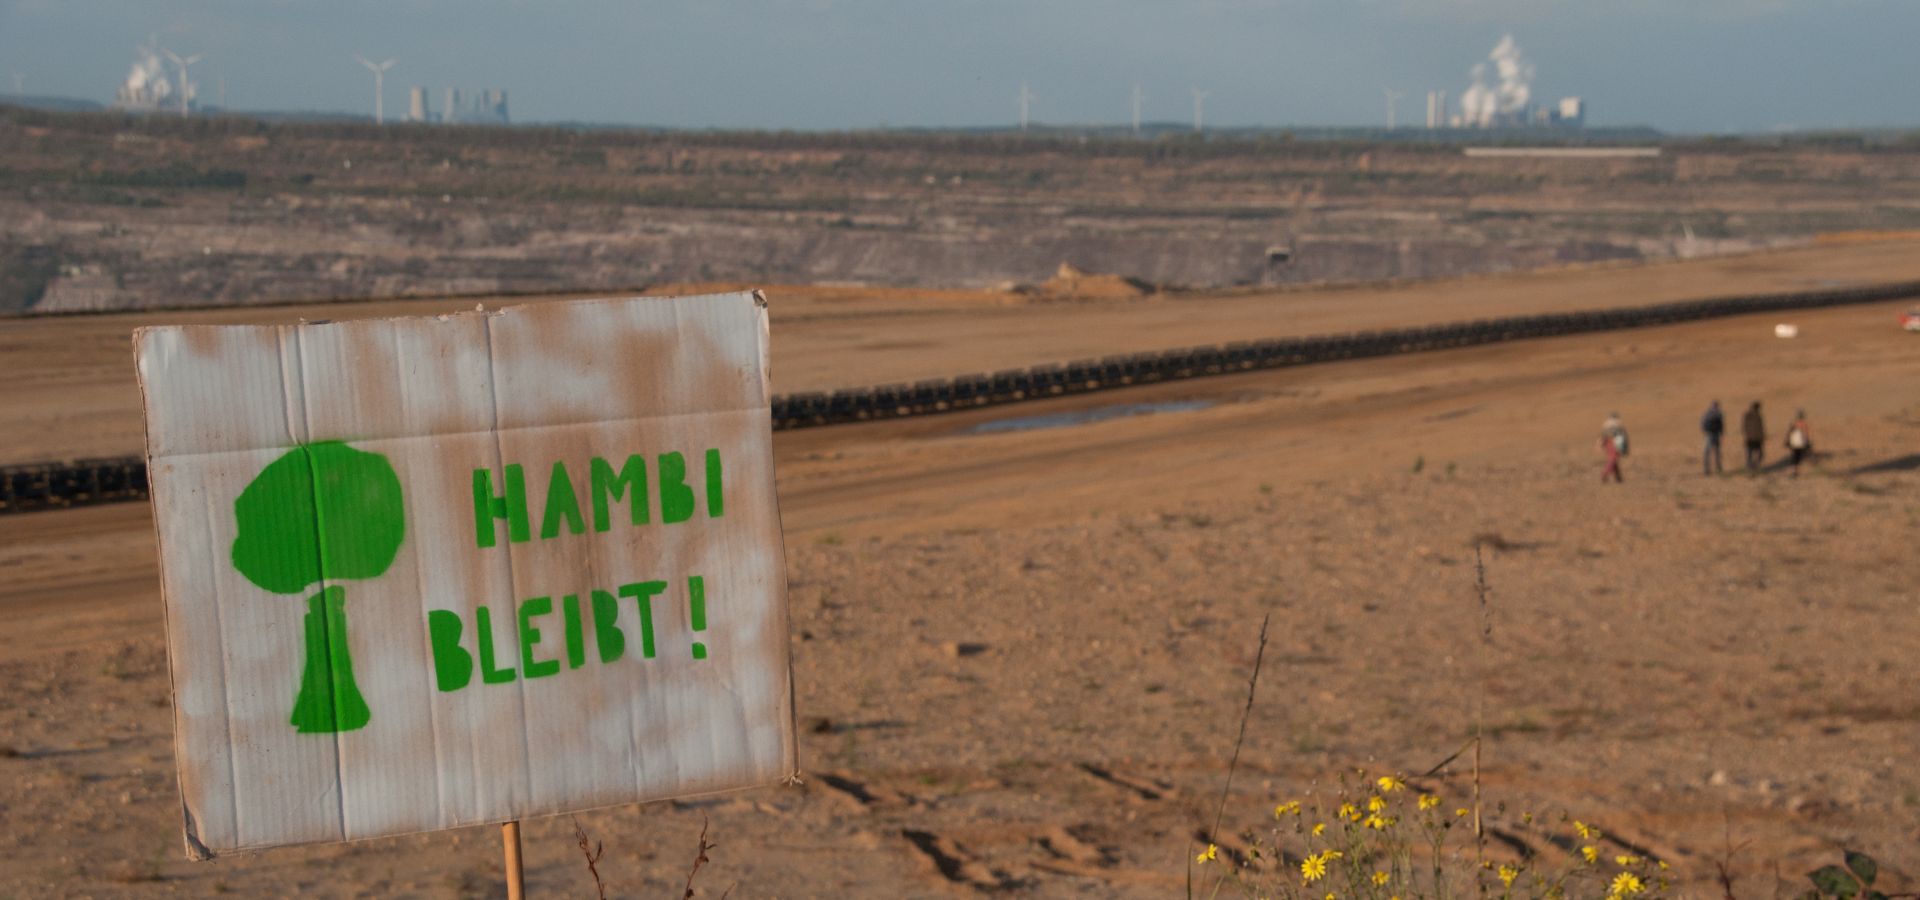 Environmentalists demonstrated on Saturday peacefully to preserve the Hambacher Forest